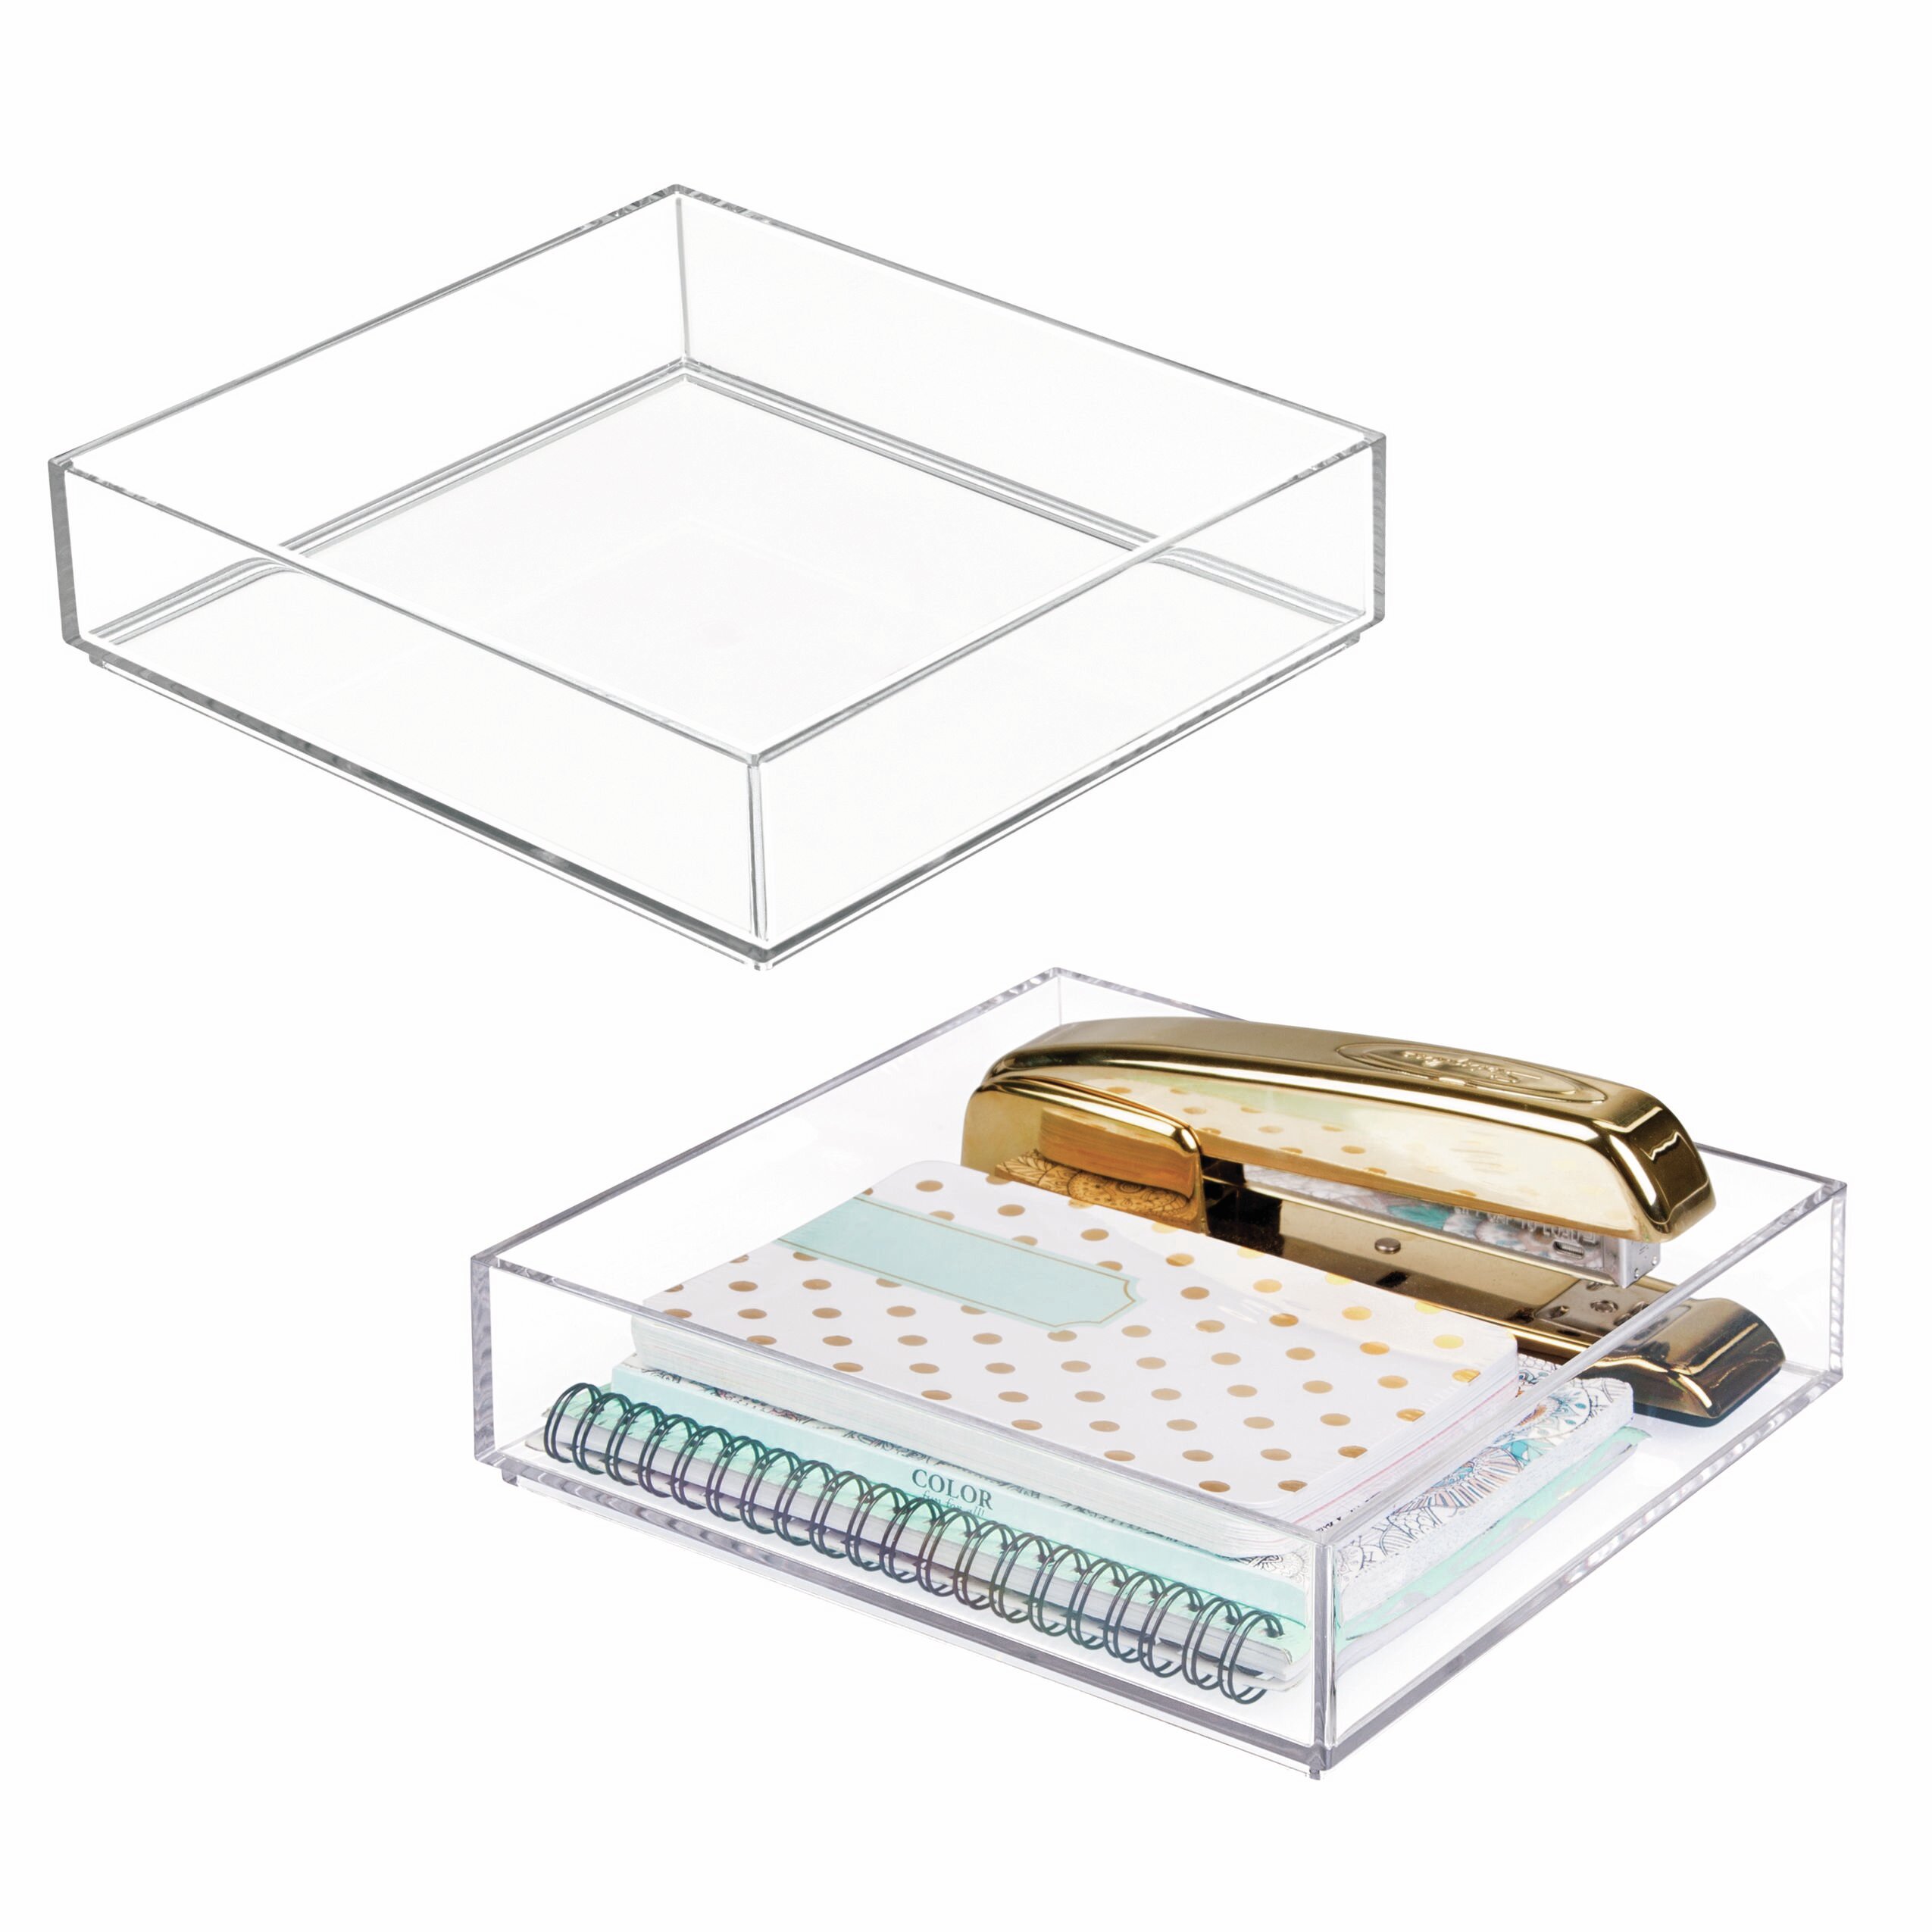 Clear Made of Plastic Drawer Storage Insert iDesign Clarity Organiser/Storage Box for Sorting Small Items 